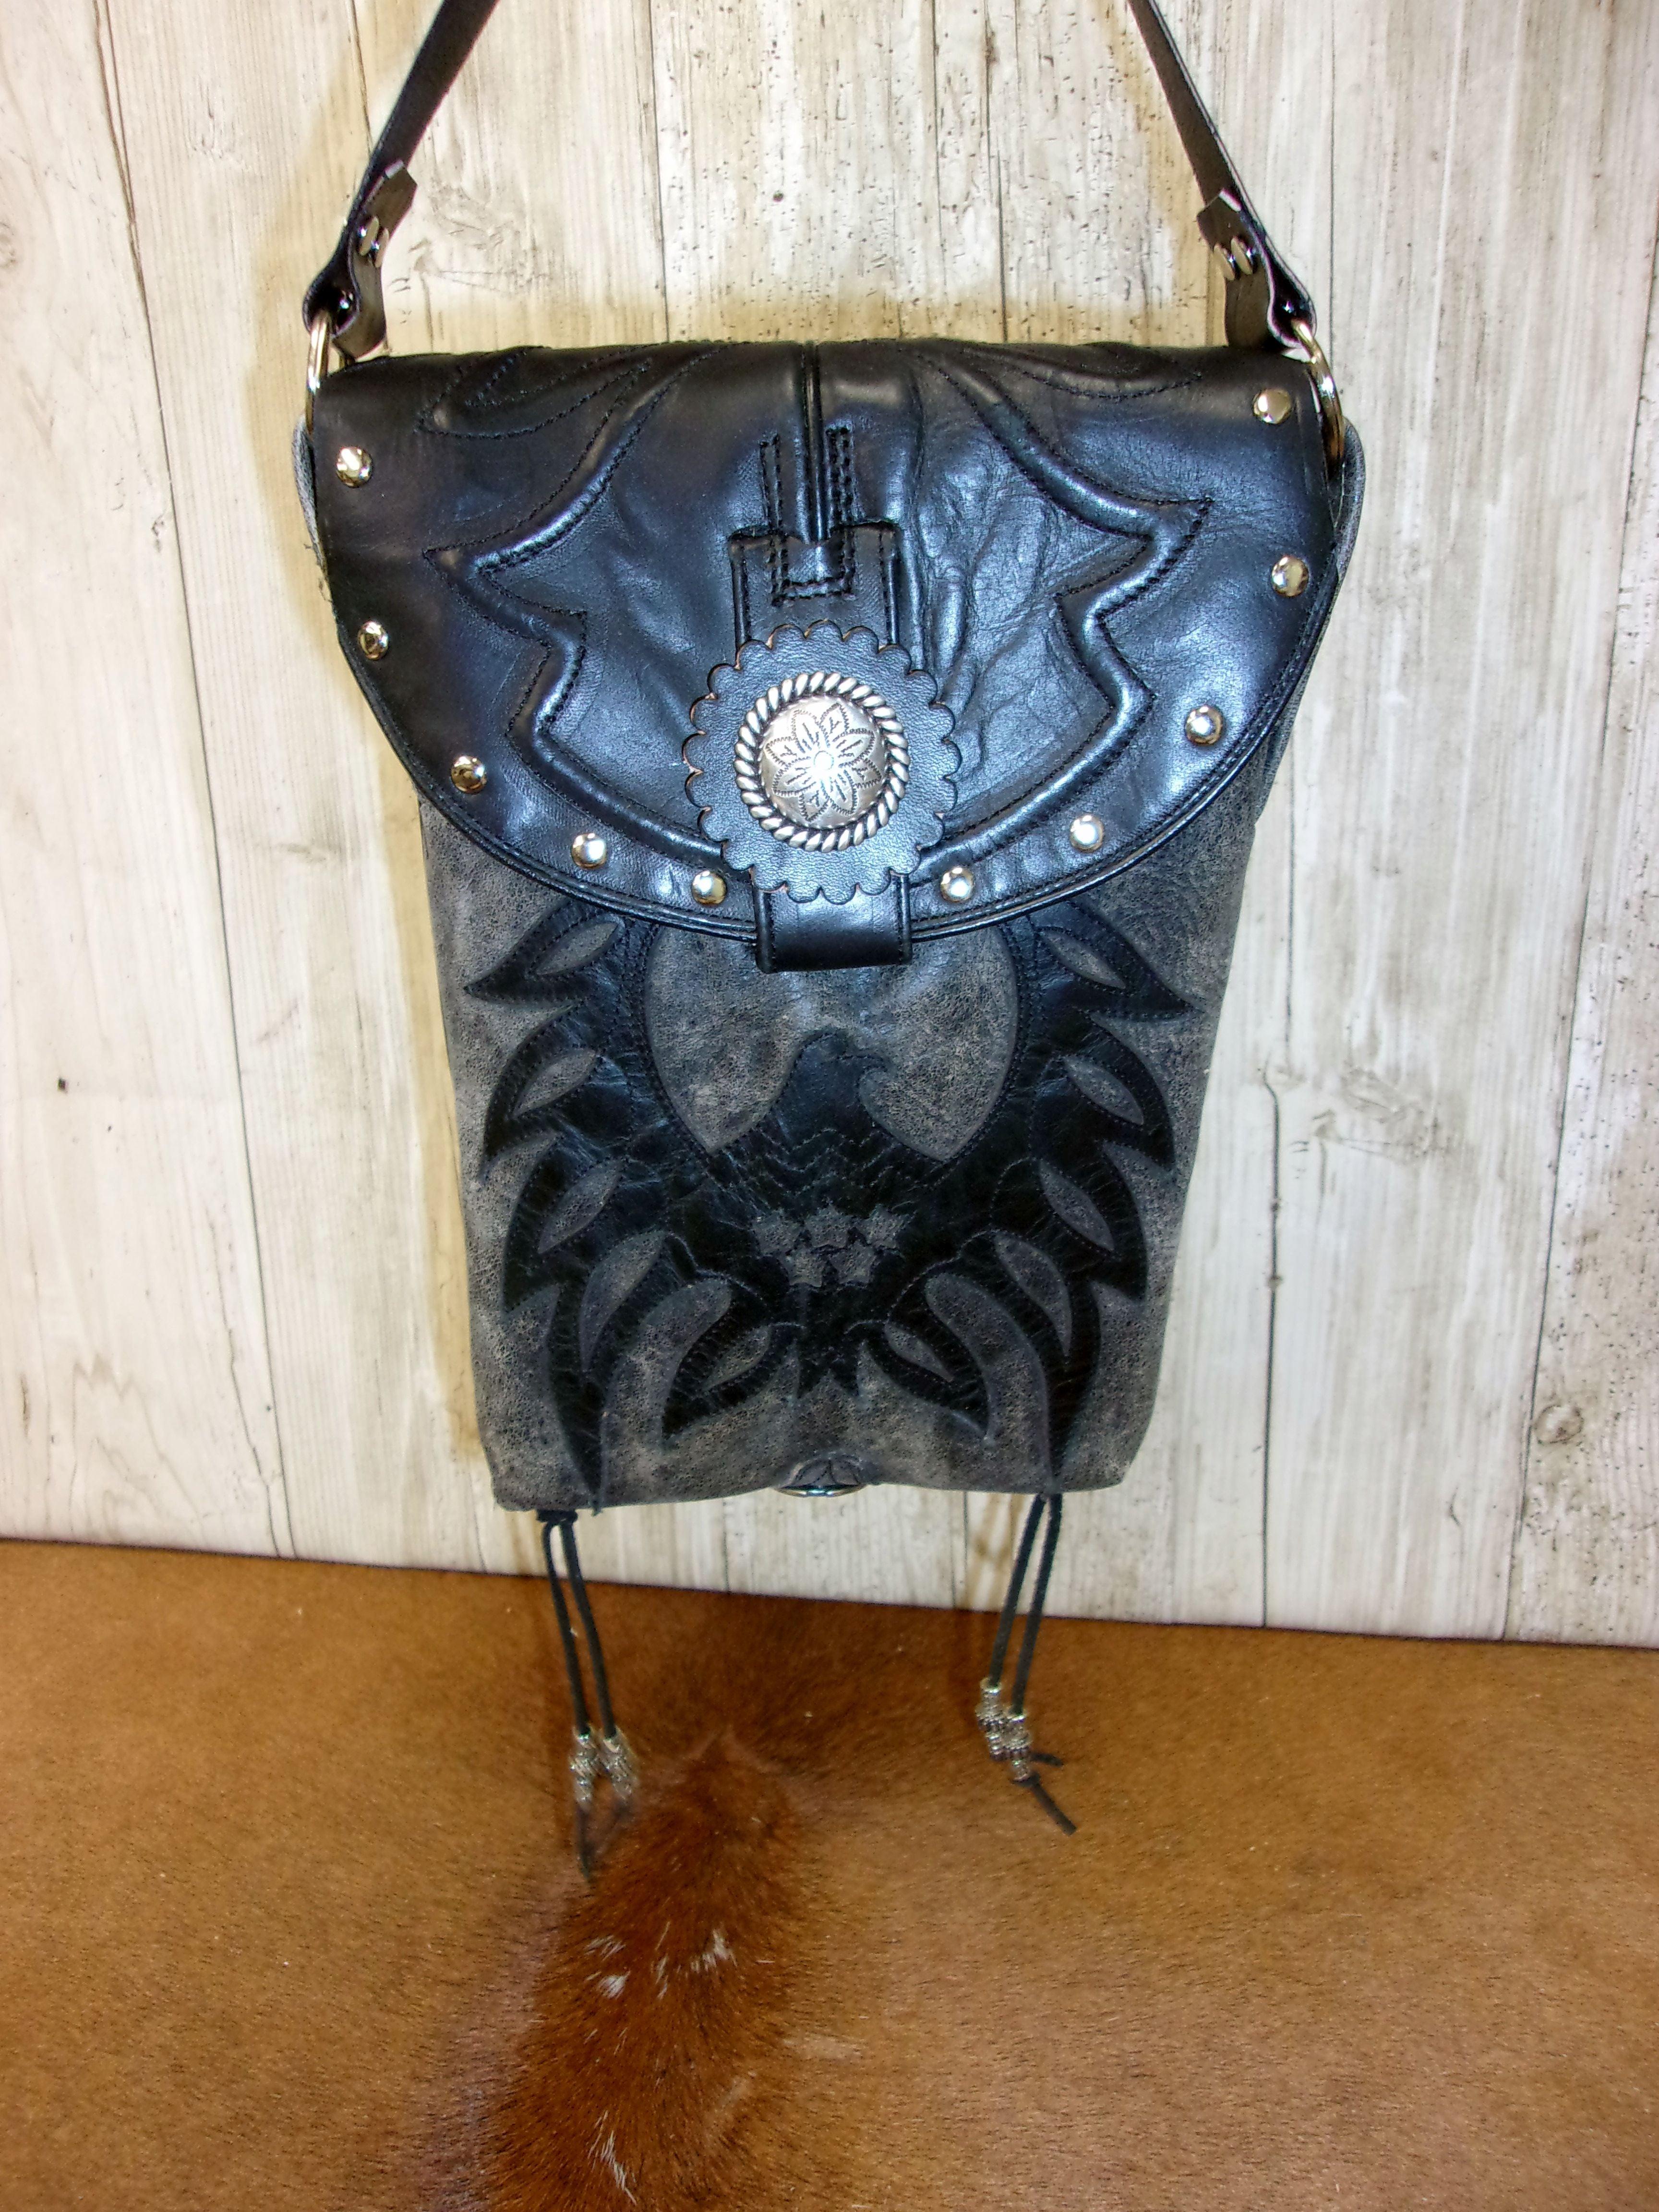 Cowboy Boot Concealed Carry Purse - Crossbody Conceal Carry Purse CB159 cowboy boot purses, western fringe purse, handmade leather purses, boot purse, handmade western purse, custom leather handbags Chris Thompson Bags